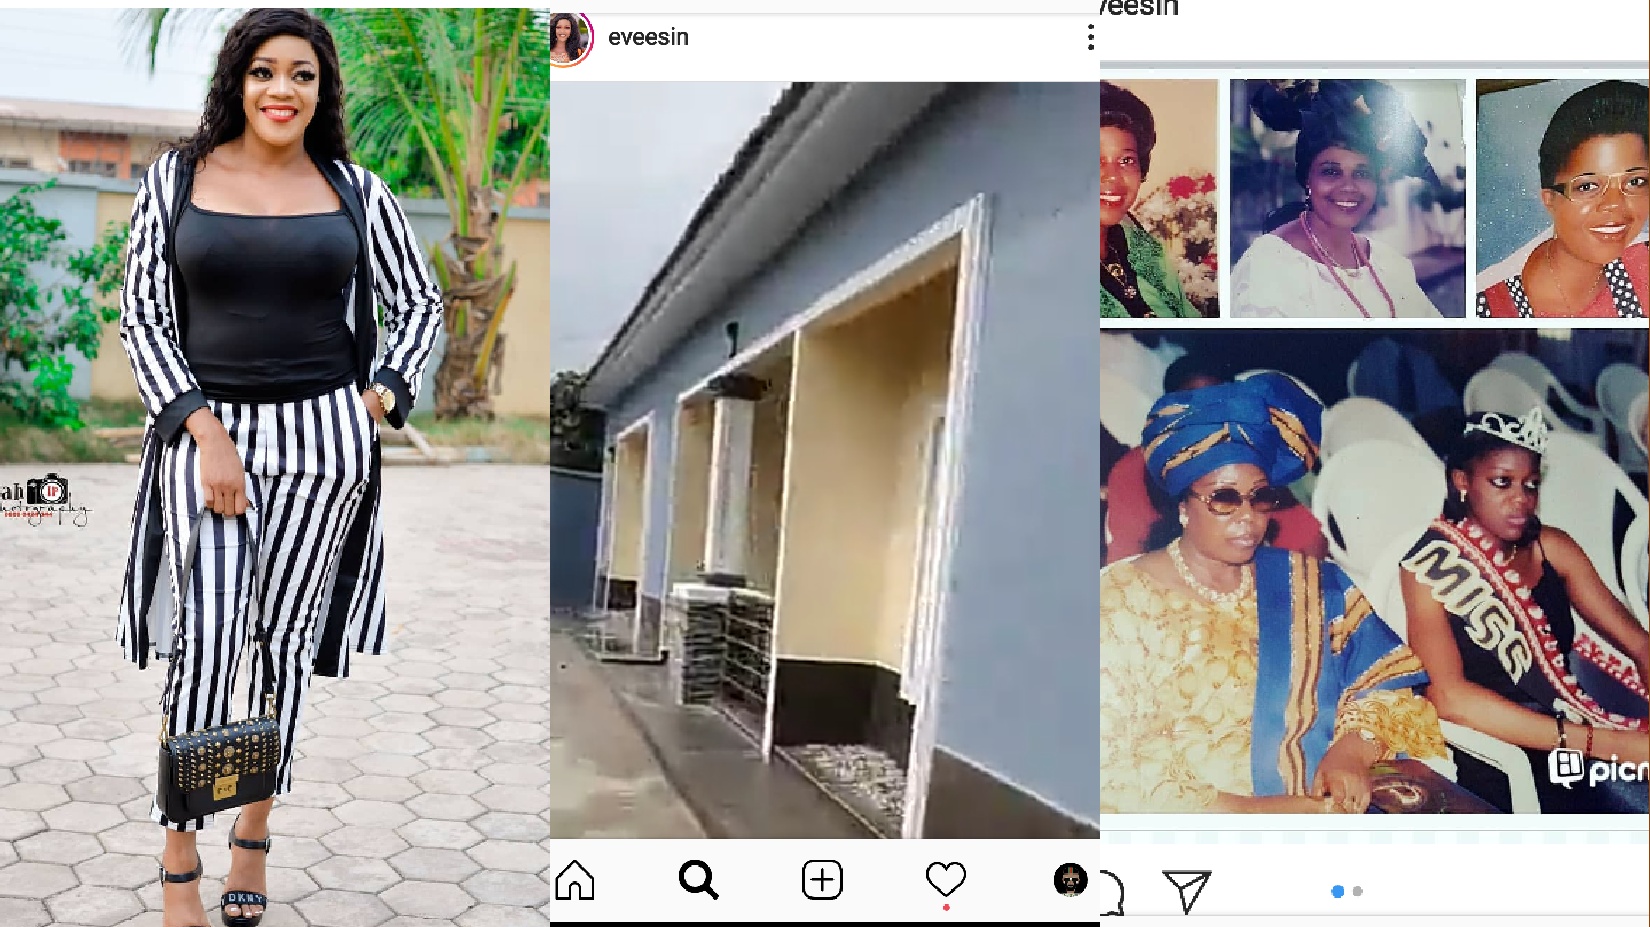 Image result for Eve Esin built a new house and dedicates it to her late mother